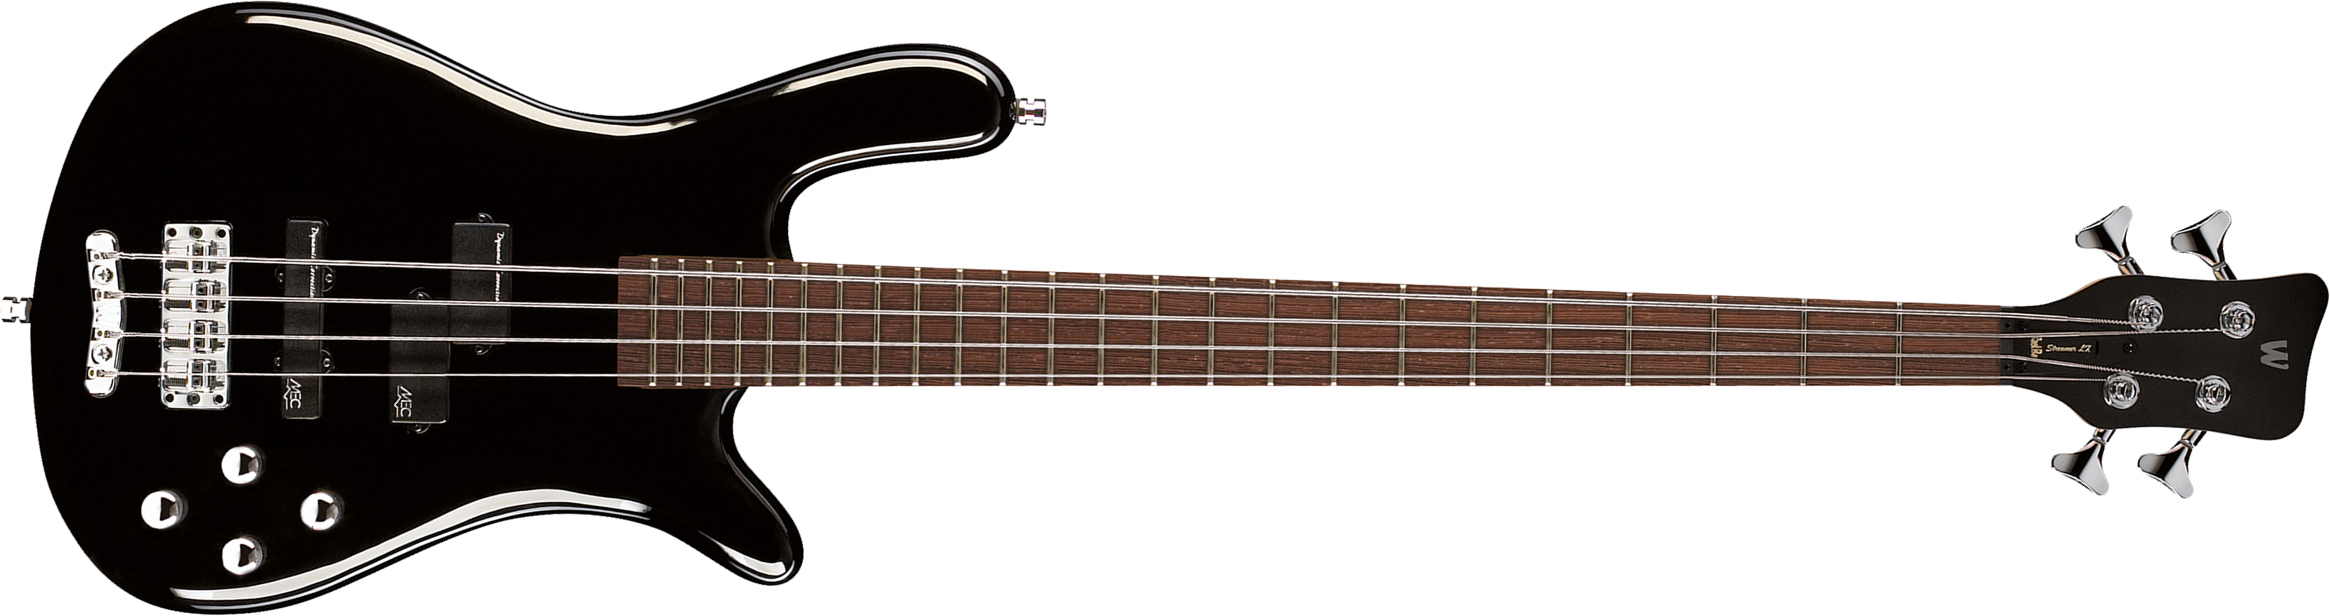 Warwick Streamer Lx4 Rockbass Active Wen - Solid Black - Solid body electric bass - Main picture